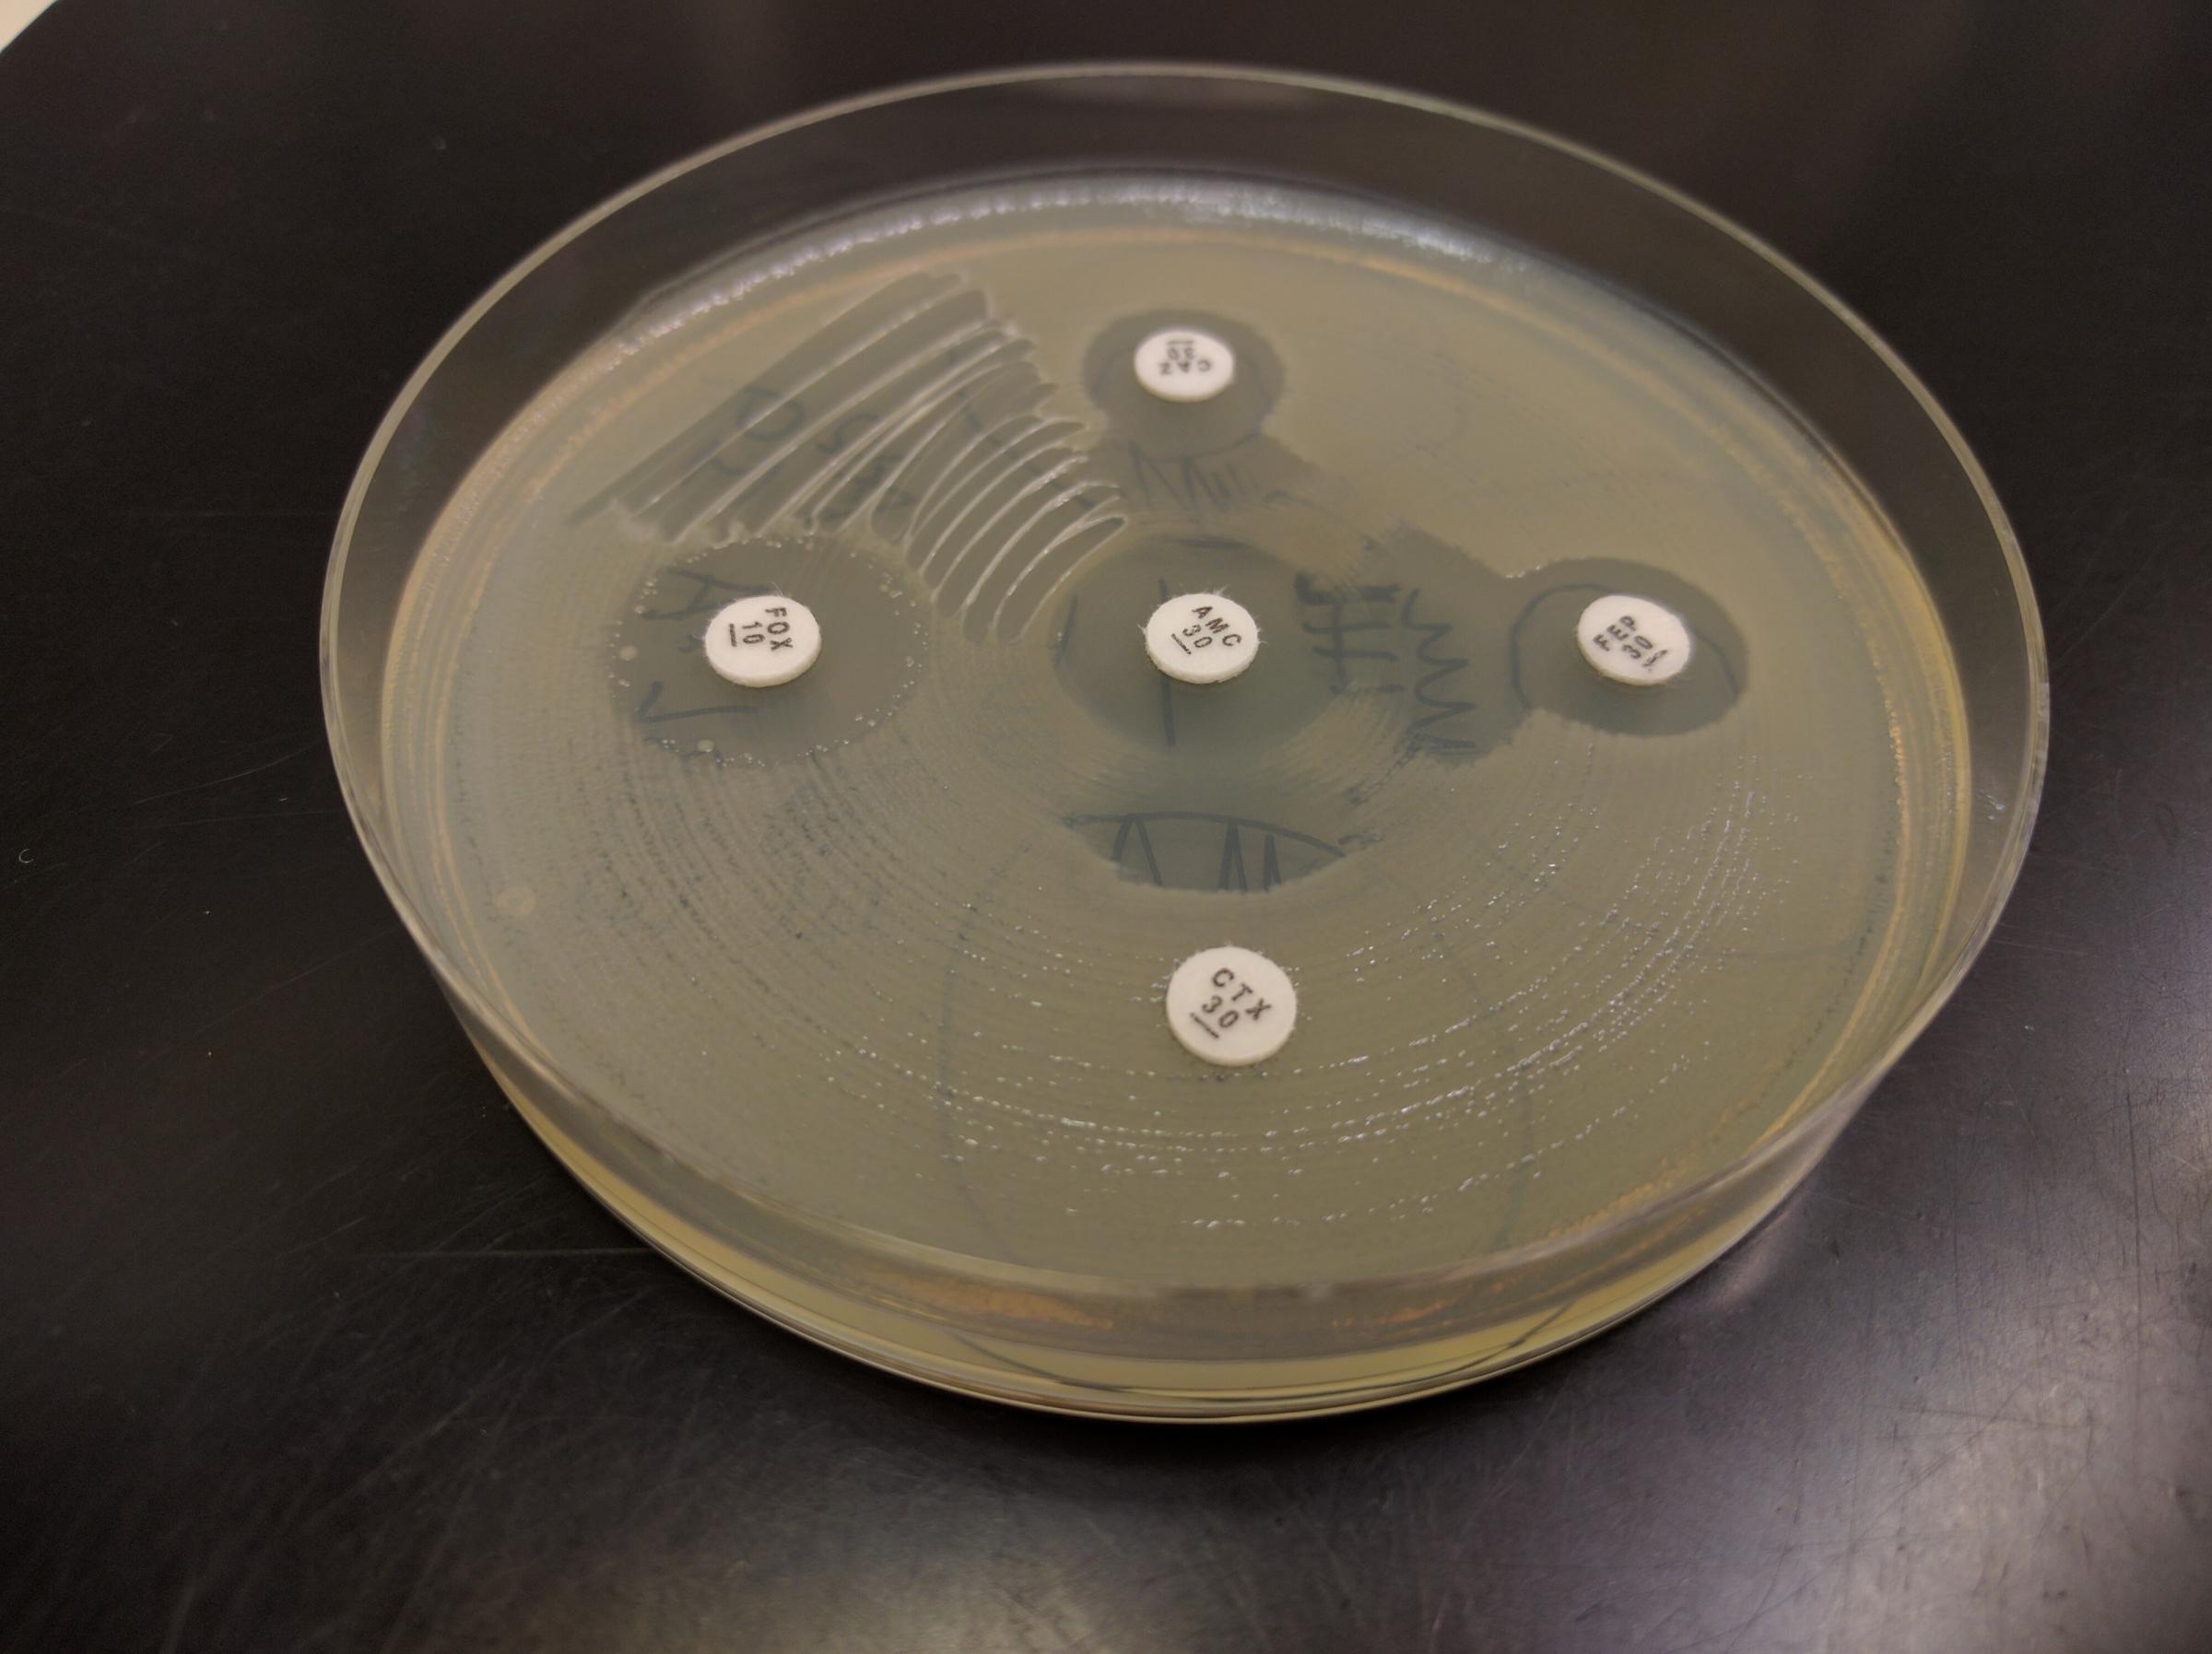 A test for antibiotic resistance. The cloudy film on the petri dish surface are E. coli bacteria and the little white discs contain different antibiotics. If the E. coli are resistant to the antibiotic, they grow right up to the edge of the white disc. If the disc has a little "halo" around it, that means the E. coli are susceptible to the antibiotic. (Photo courtesy of Jonas Bonnedahl)